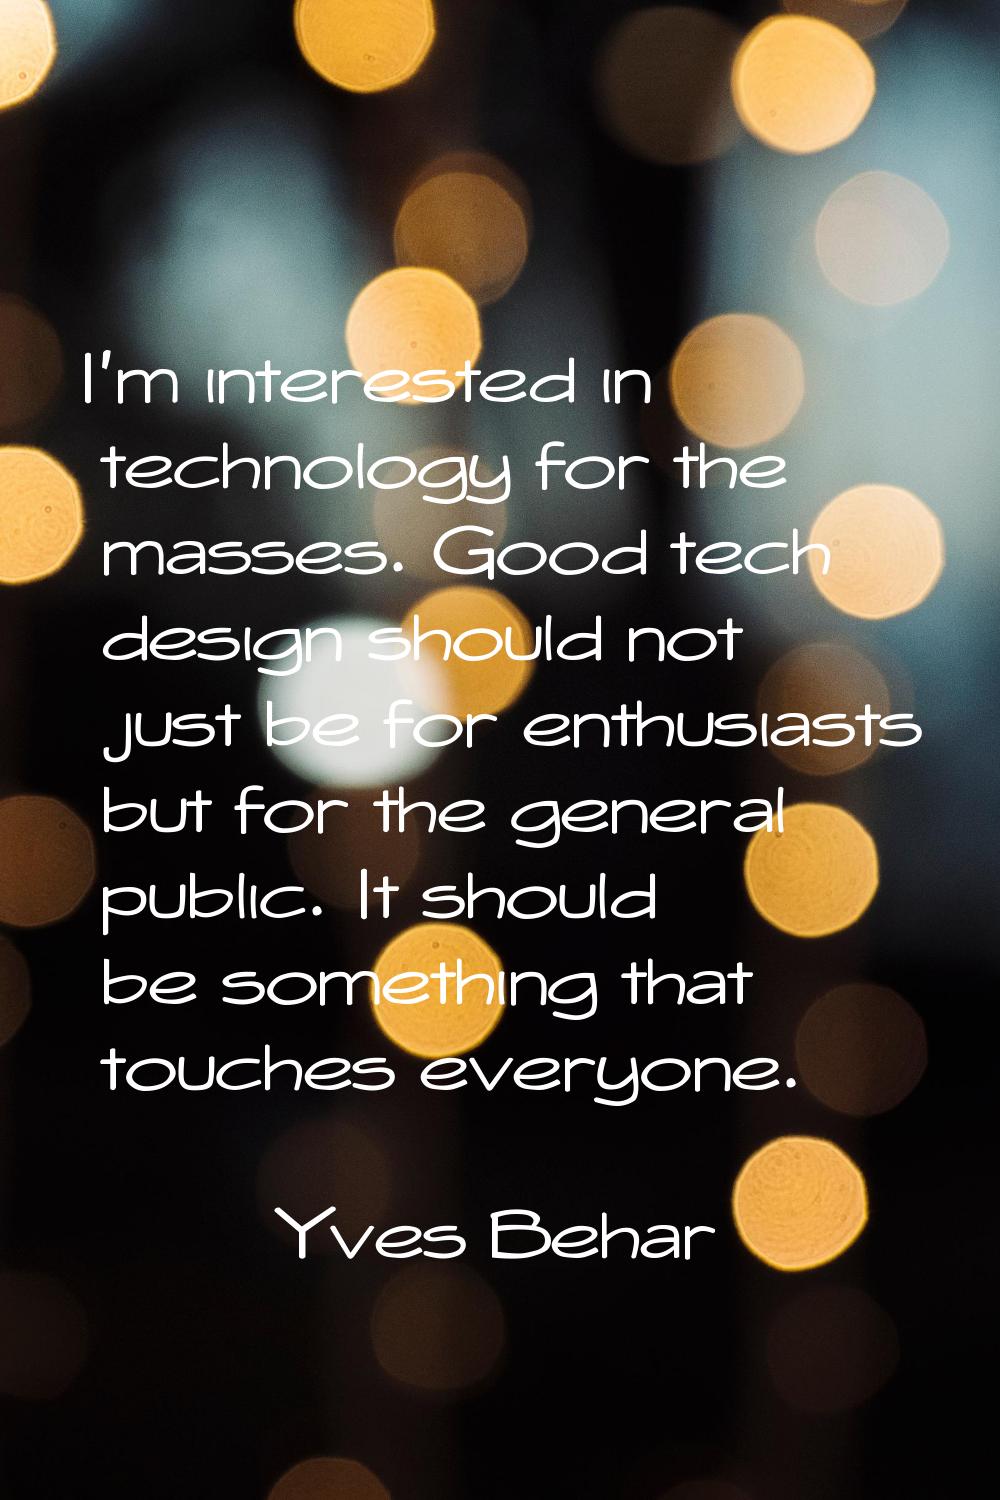 I'm interested in technology for the masses. Good tech design should not just be for enthusiasts bu